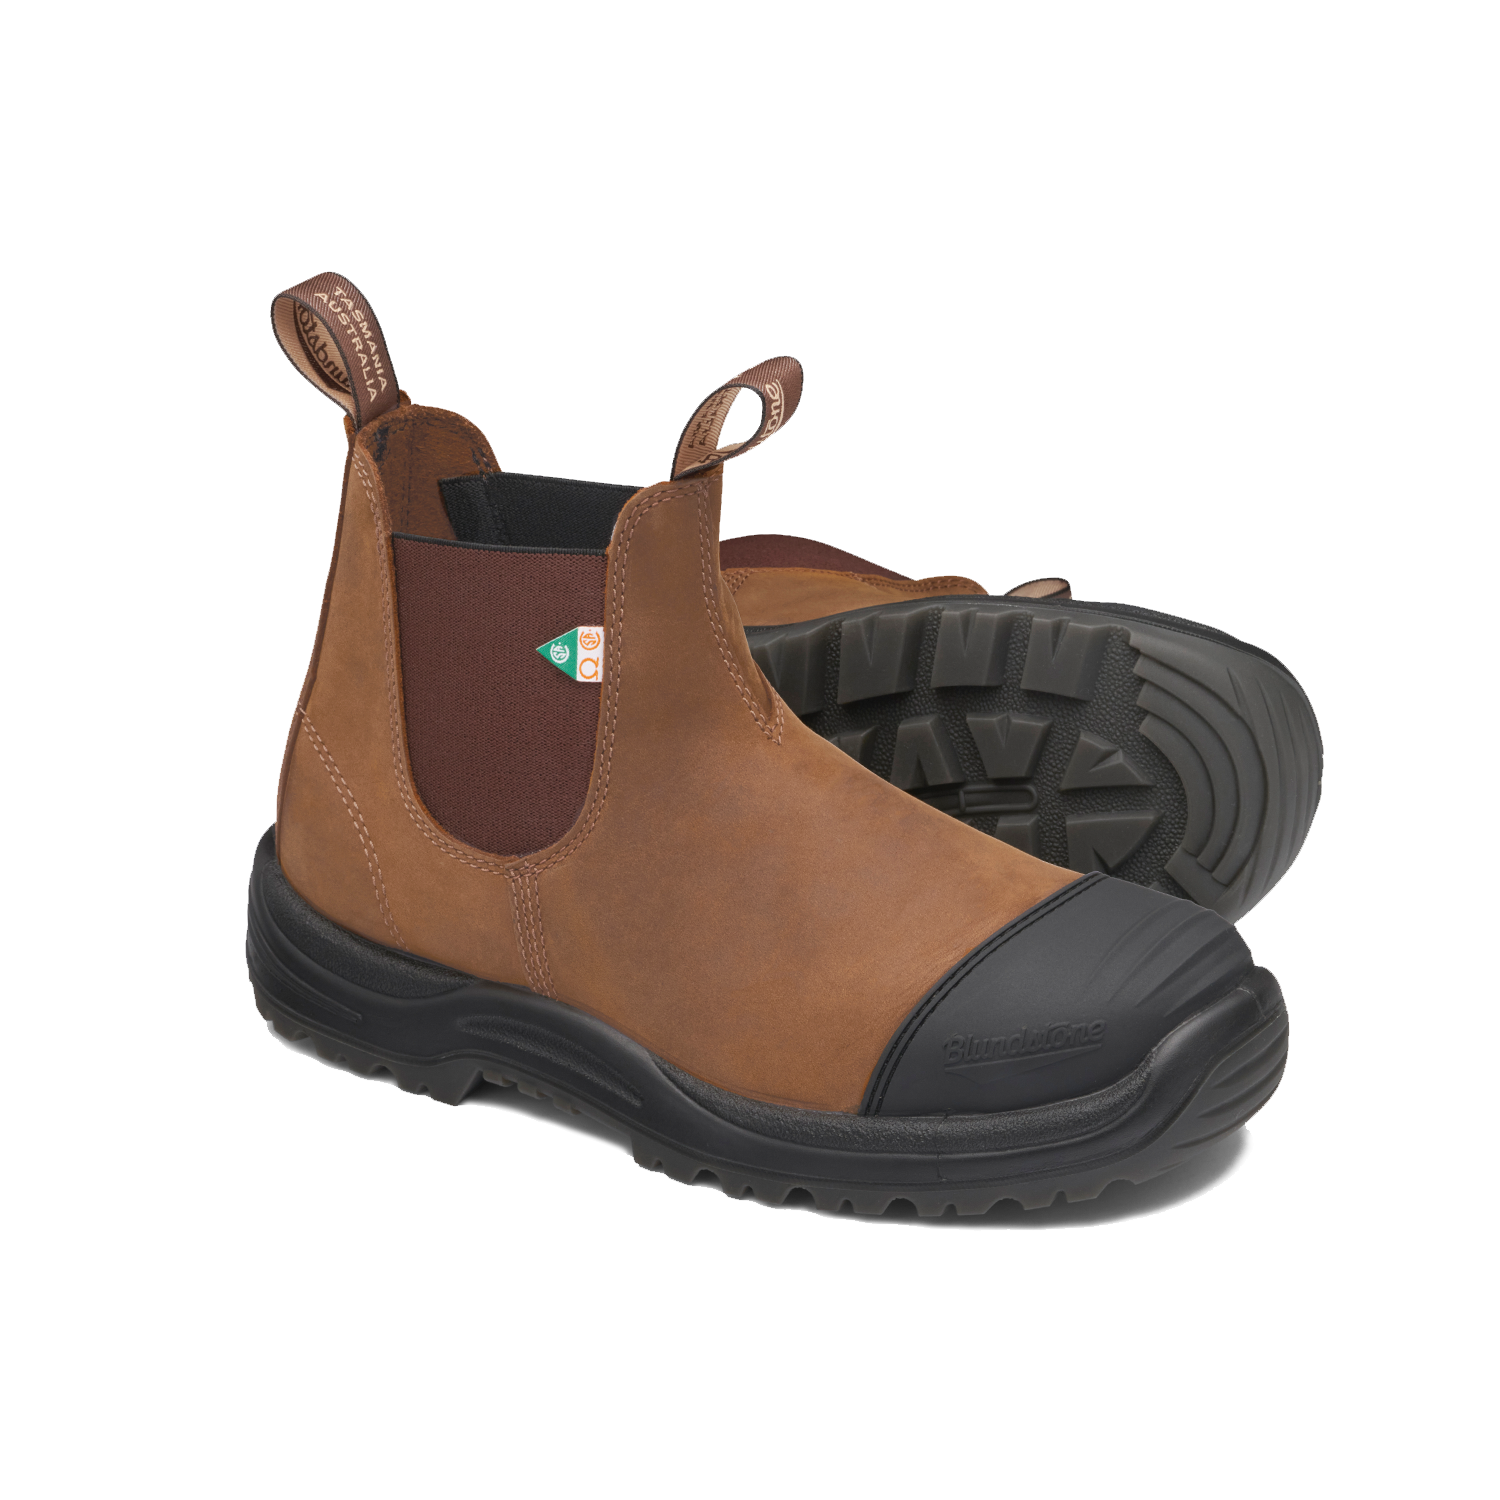 Blundstone 169 Work & Safety Boot Rubber Toe Cap Saddle Brown